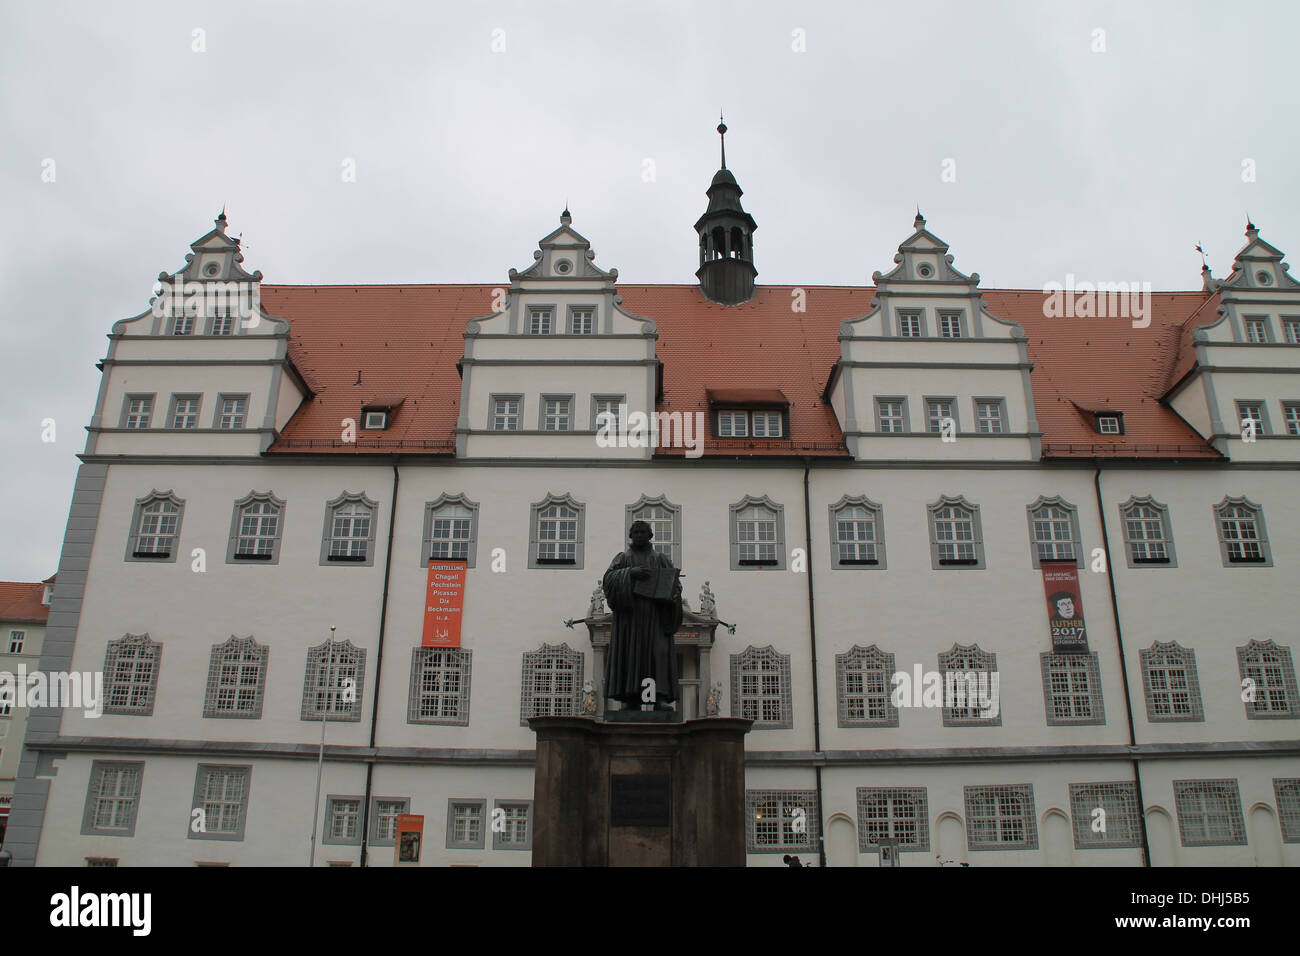 The town hall in Wittenberg Stock Photo